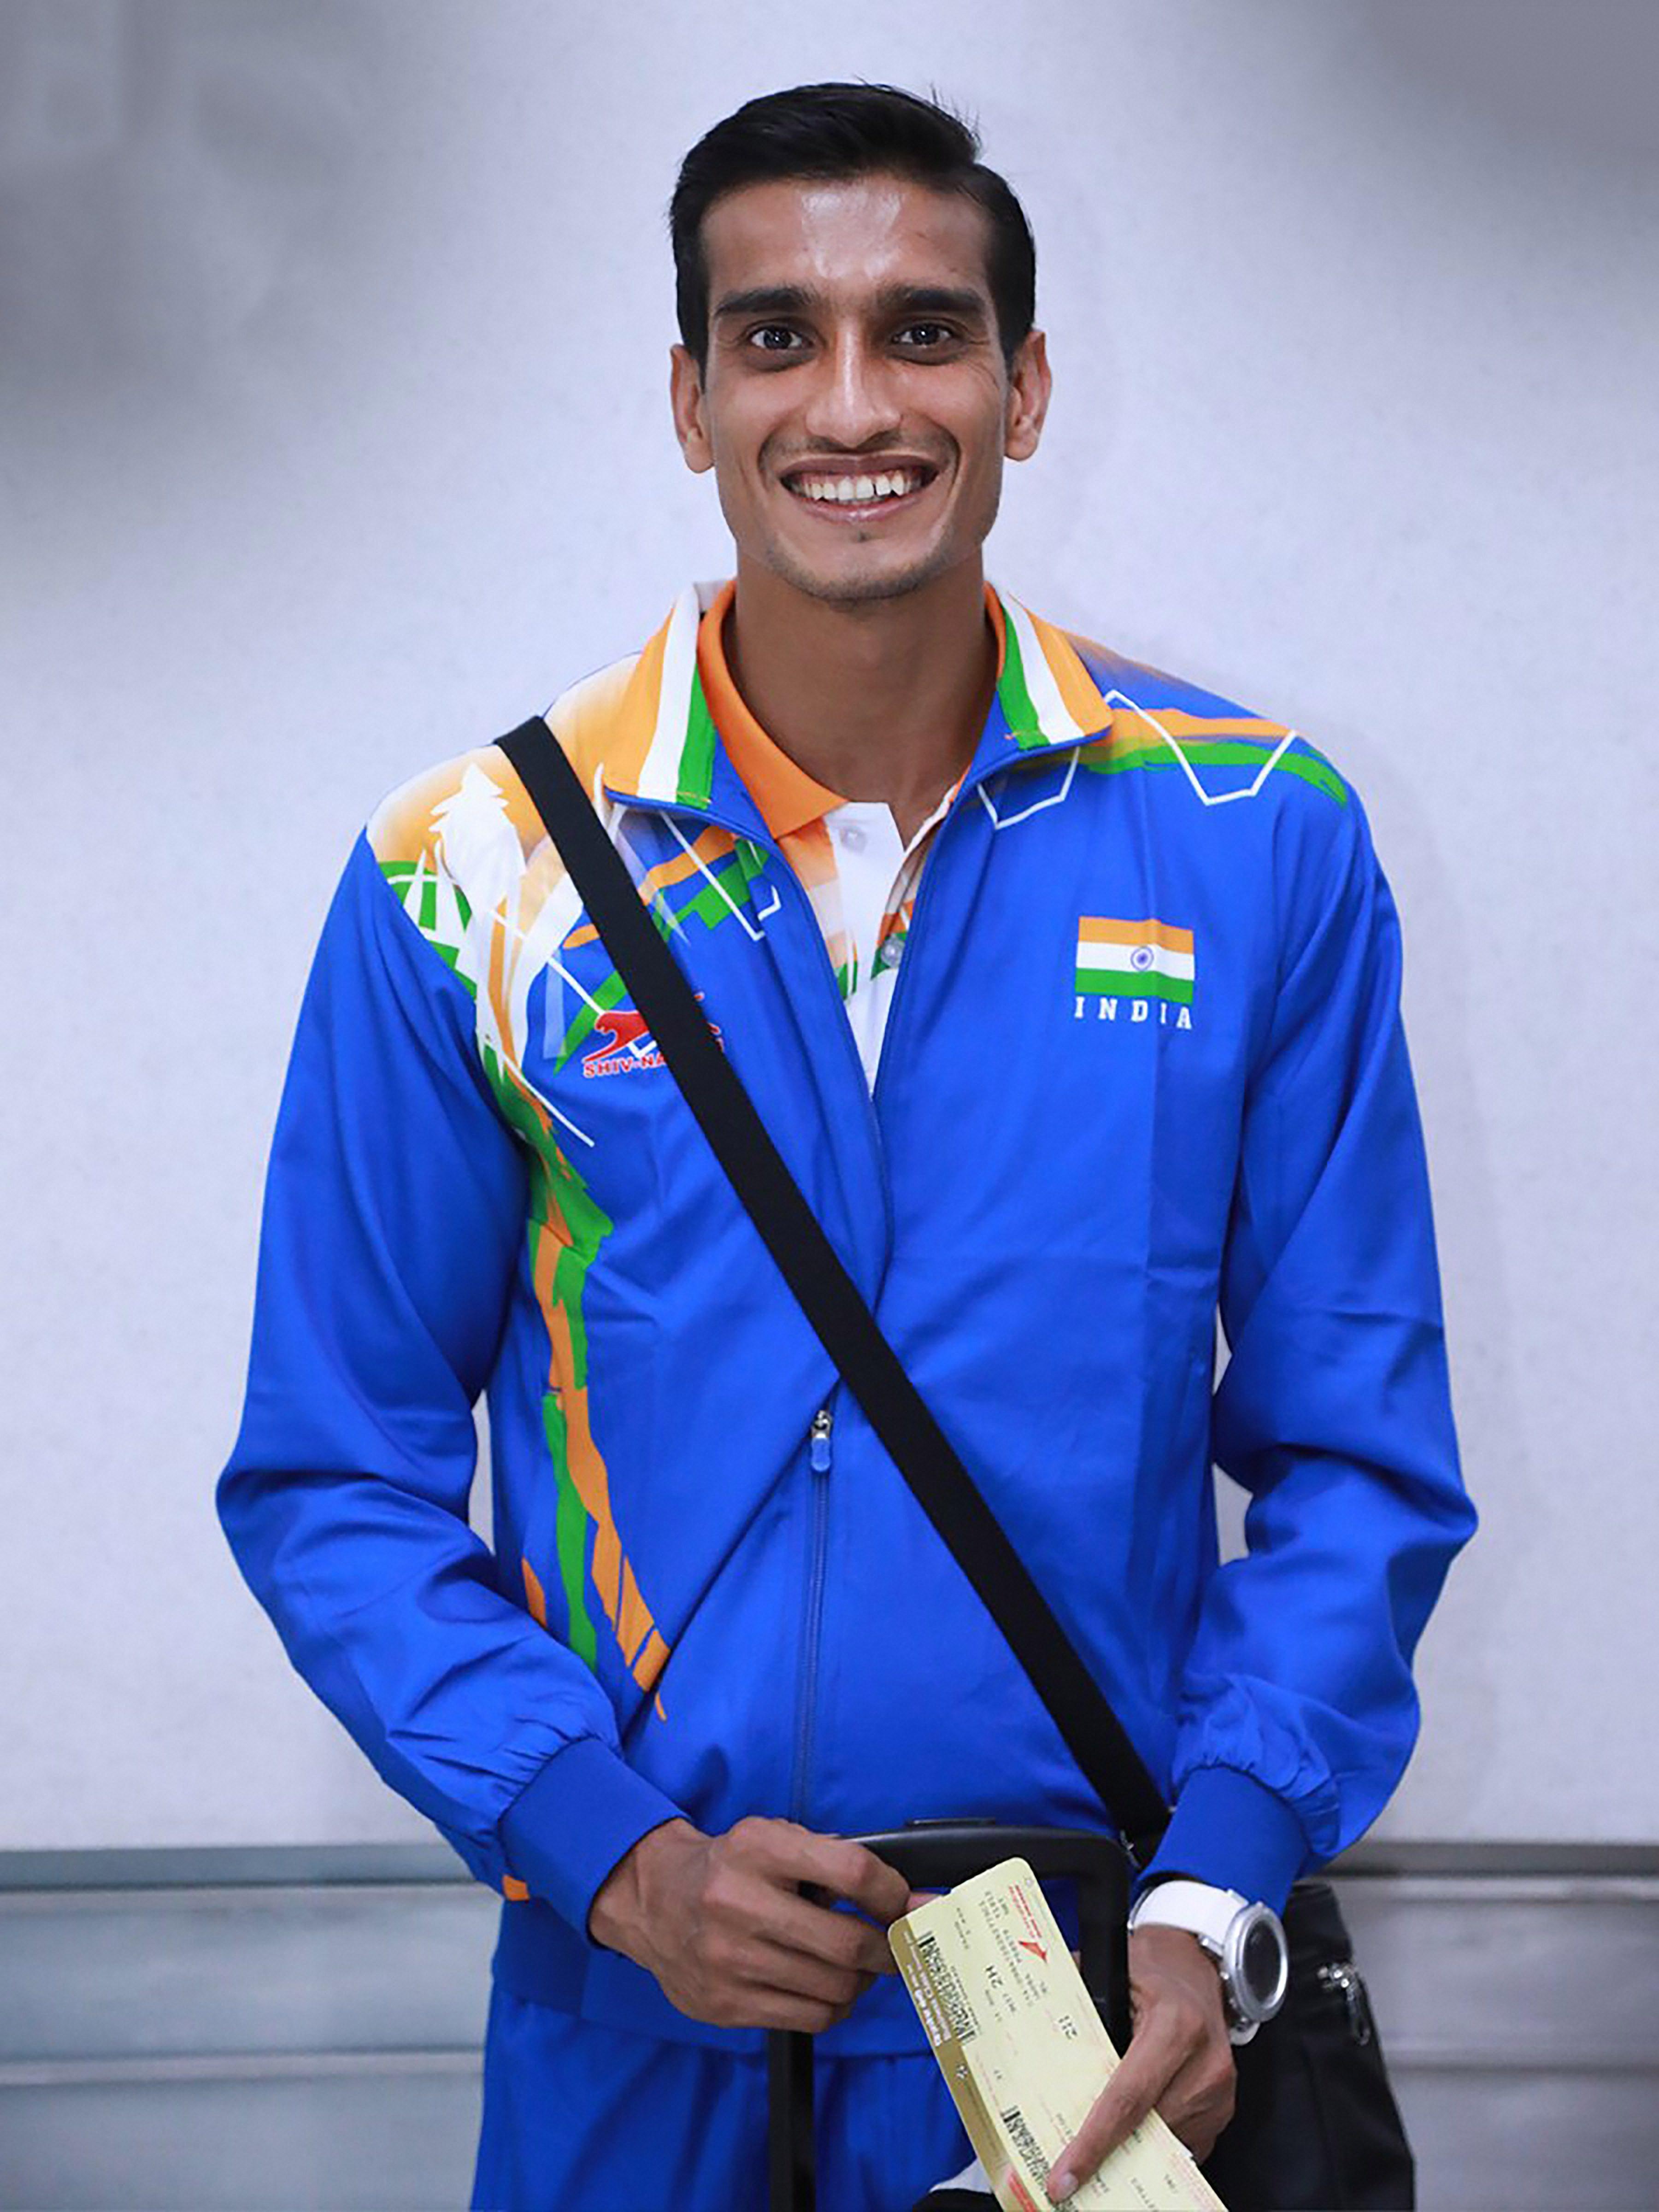 Sharad Kumar - Sharad Kumar clinched a bronze medal in the men's high jump T42 event at the Tokyo Paralympics.  Kumar took the bronze with an effort of 1.83